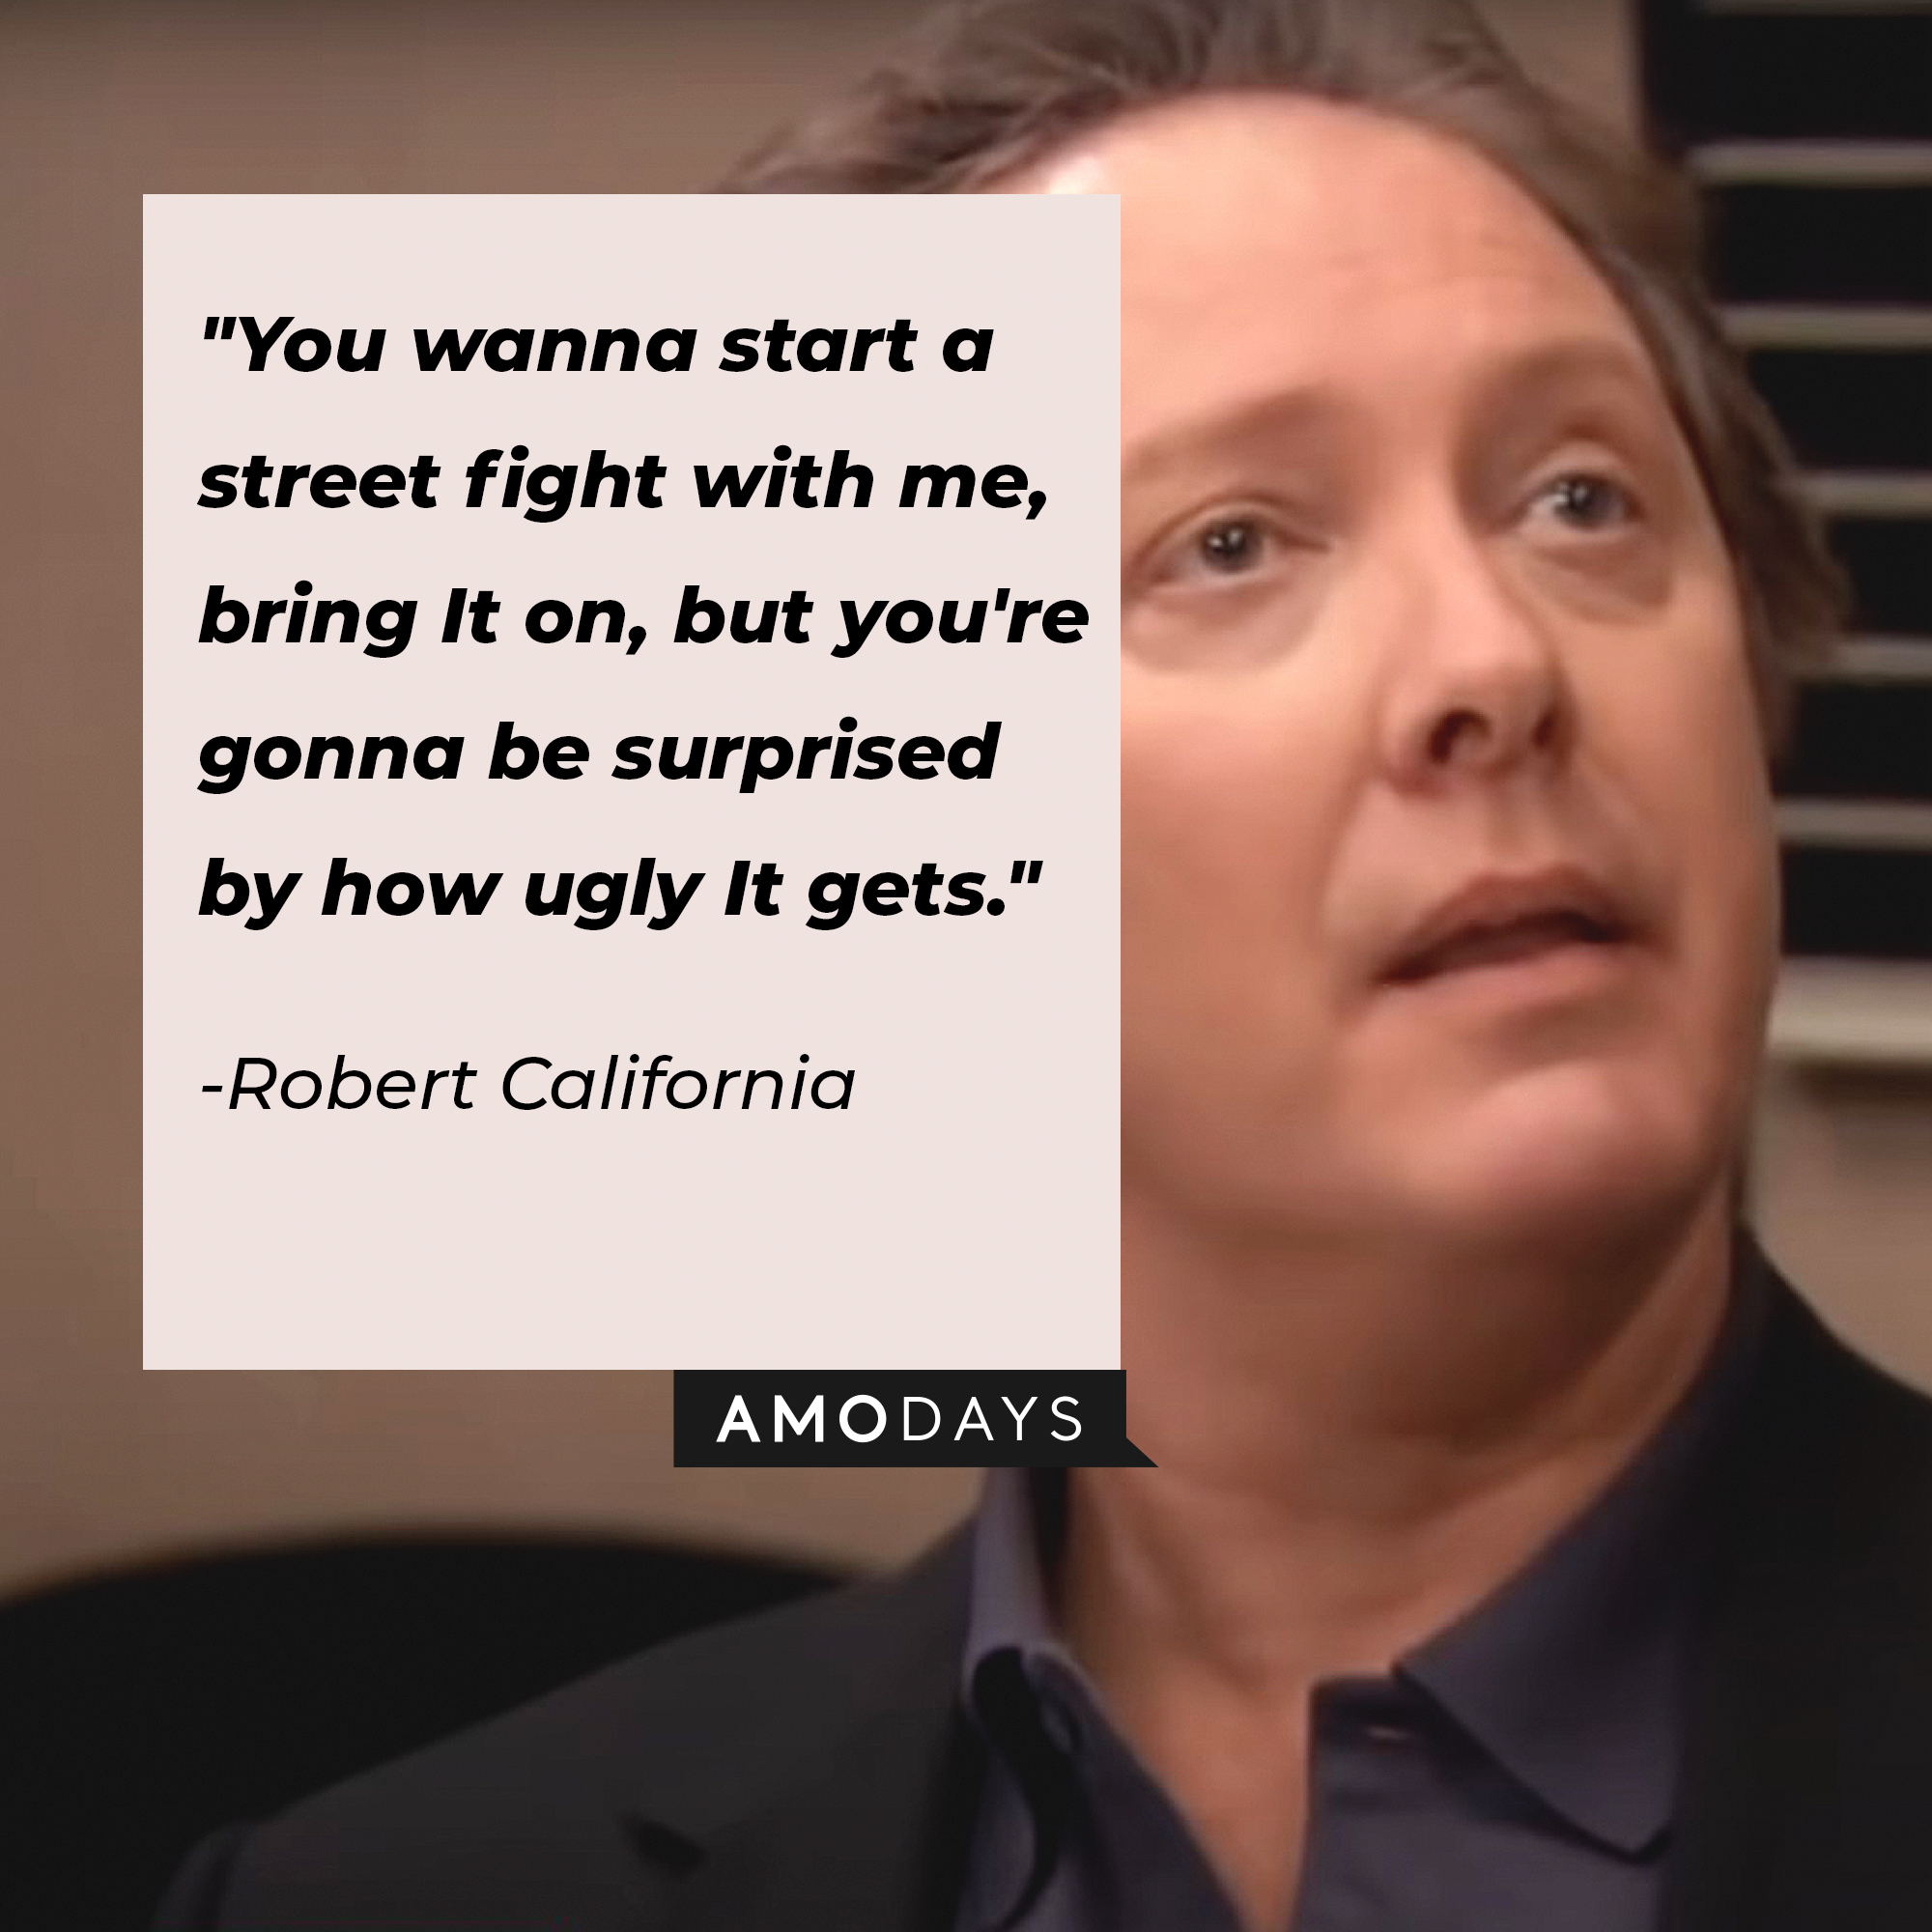 Robert California's quote: "You wanna start a street fight with me, bring It on, but you're gonna be surprised by how ugly It gets." | Image: AmoDays